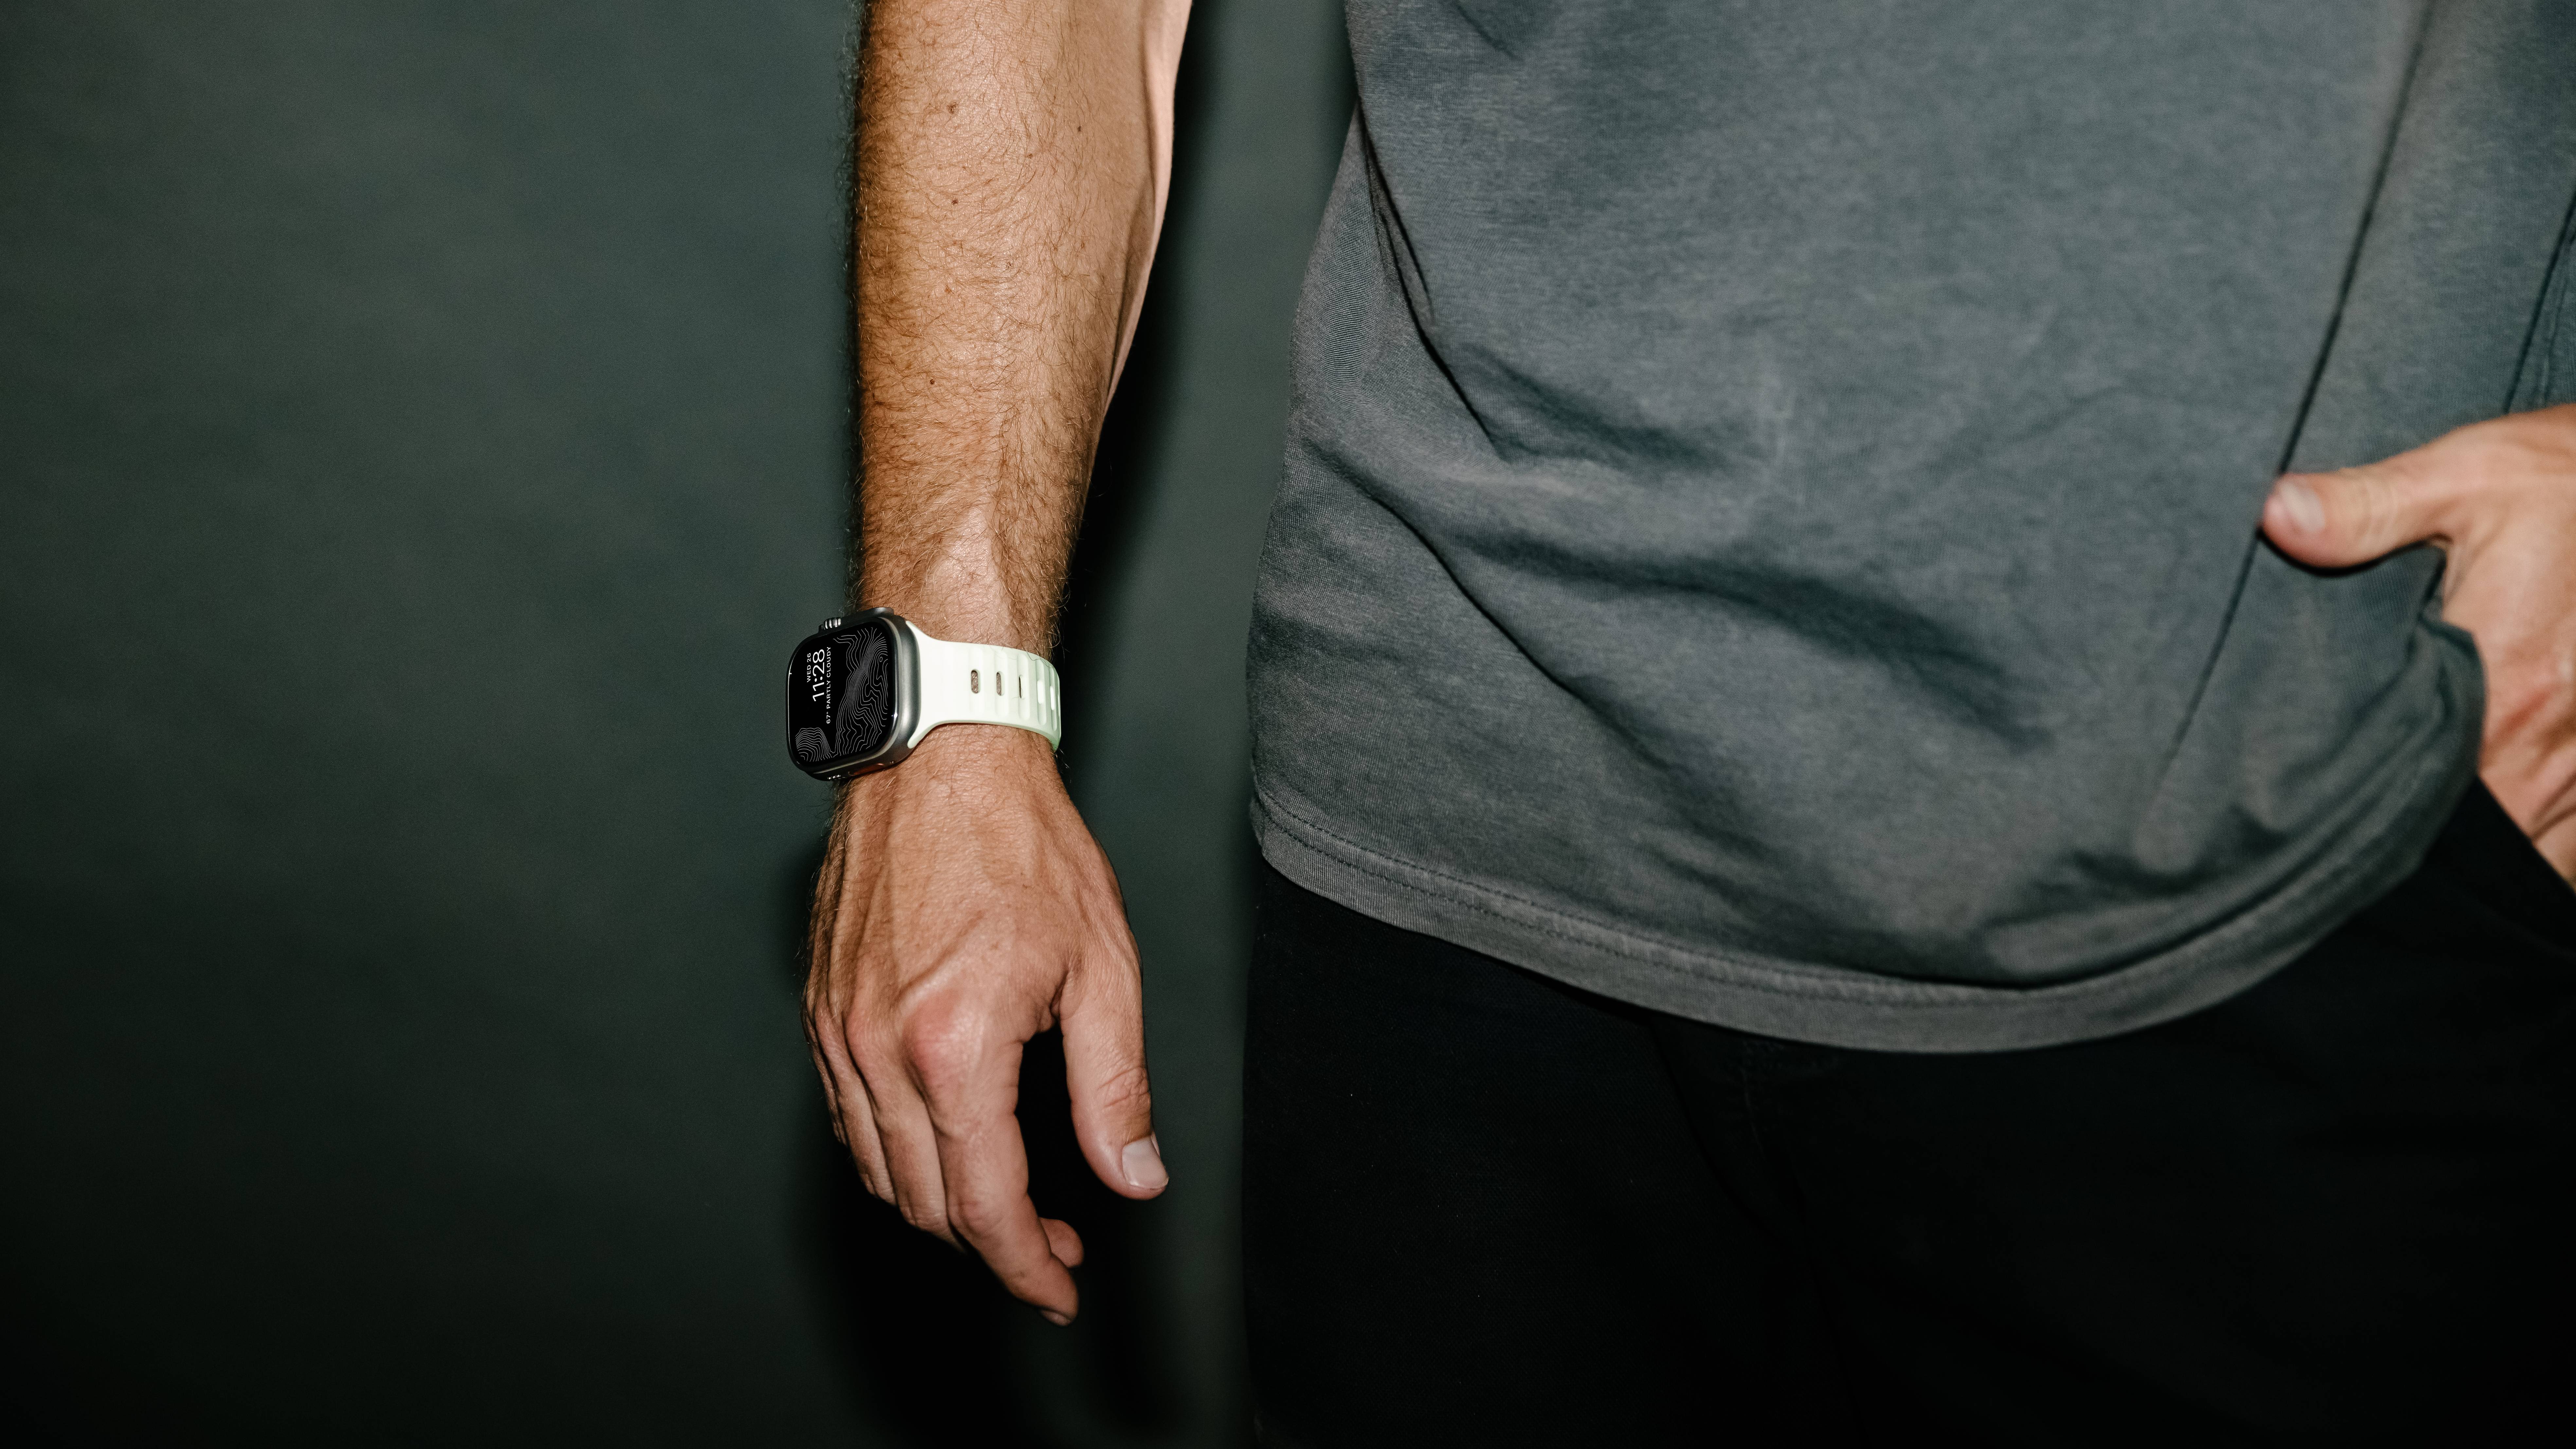 Nomad releases limited-edition Blaze Sport Band for Apple Watch